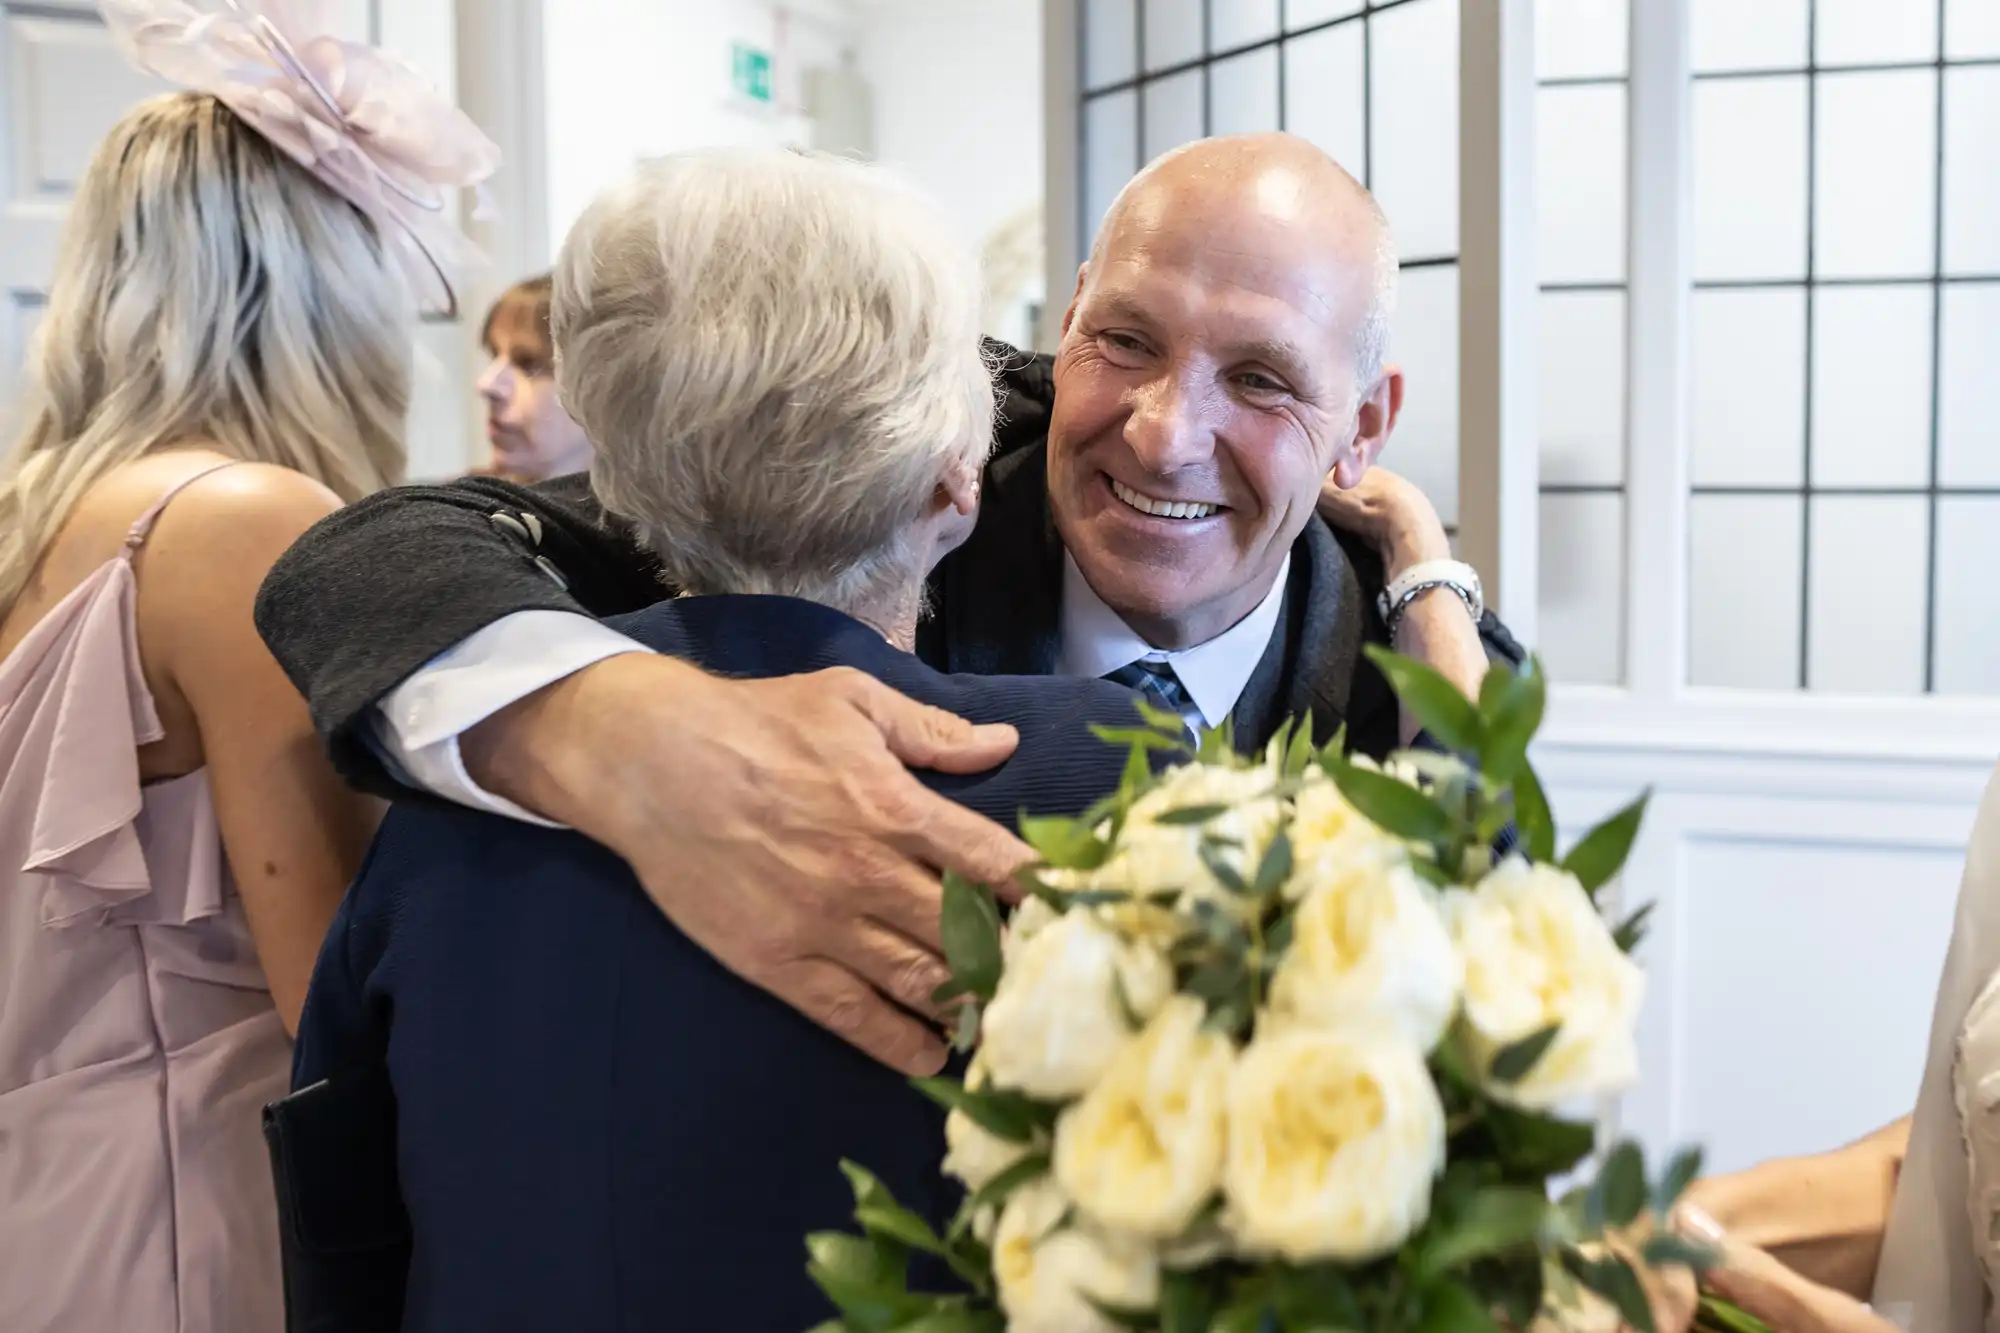 A man in a suit smiles warmly as he hugs an older woman. A bouquet of white flowers is in the foreground. Other people are in the background.